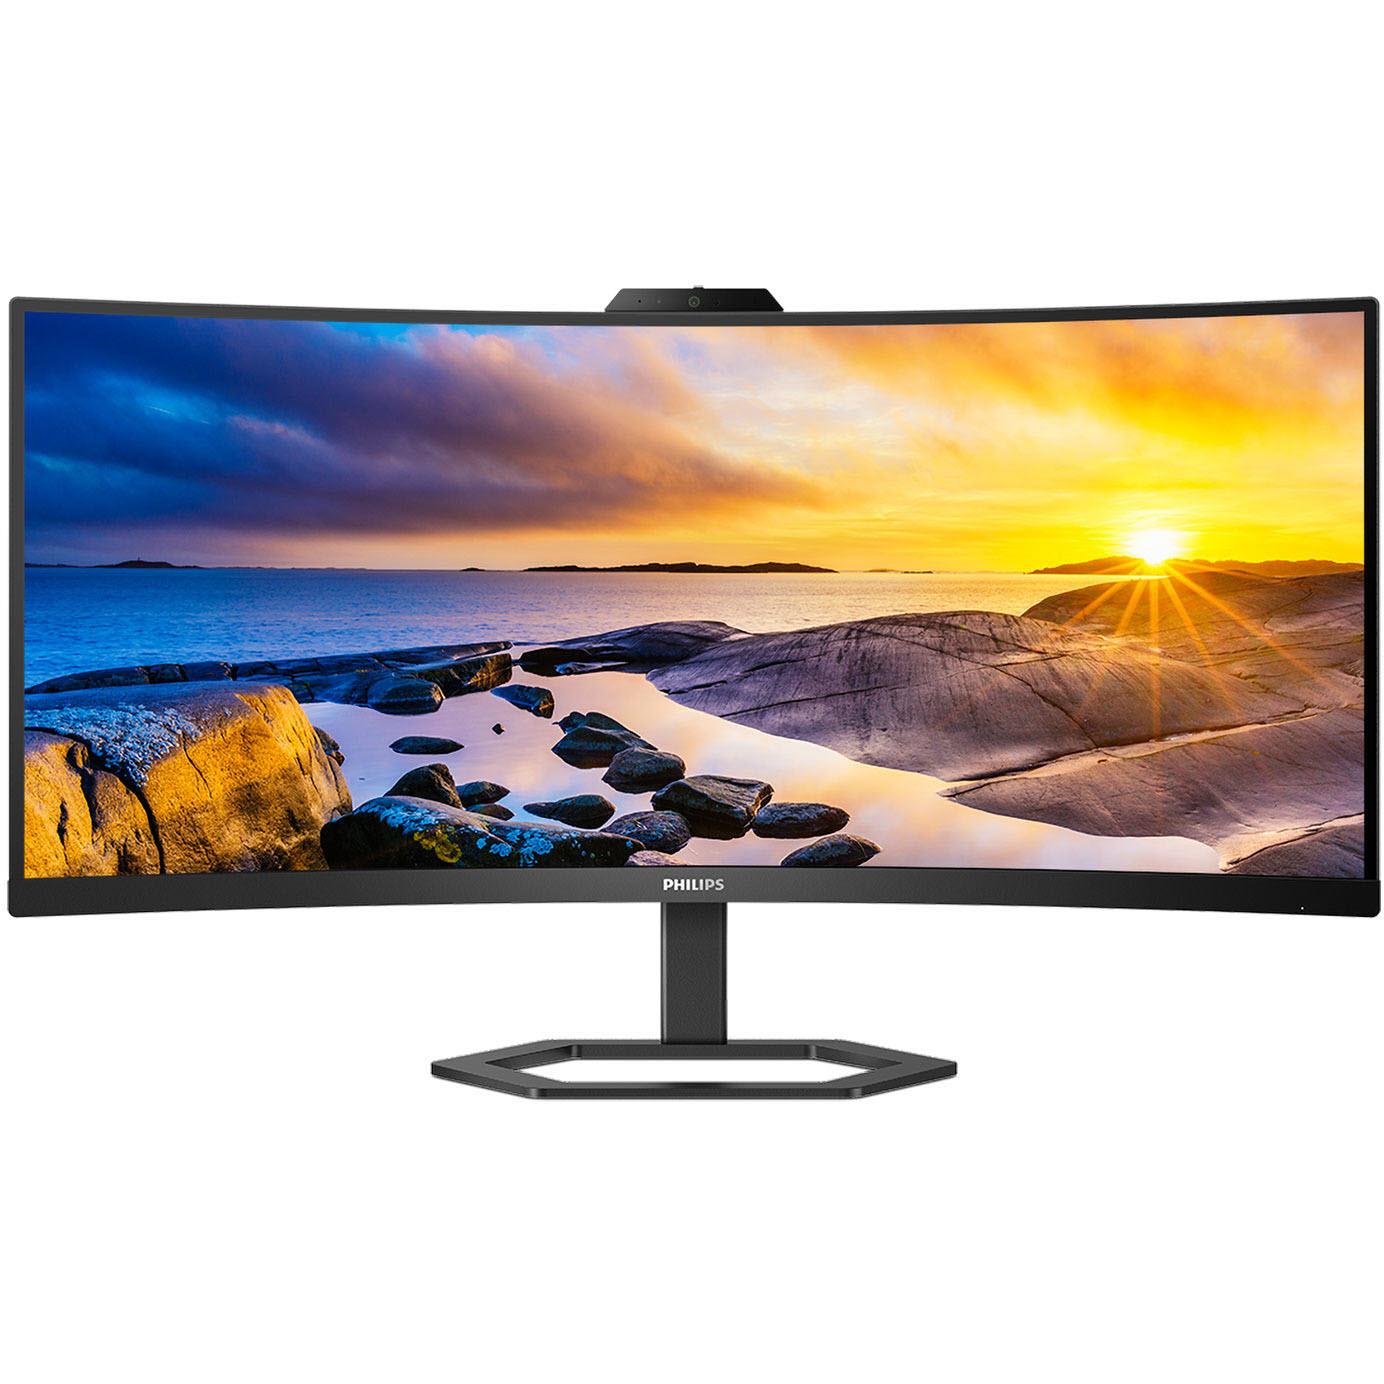 philips 34e1c5600he 34'' curved 100hz wqhd monitor with windows hello webcam